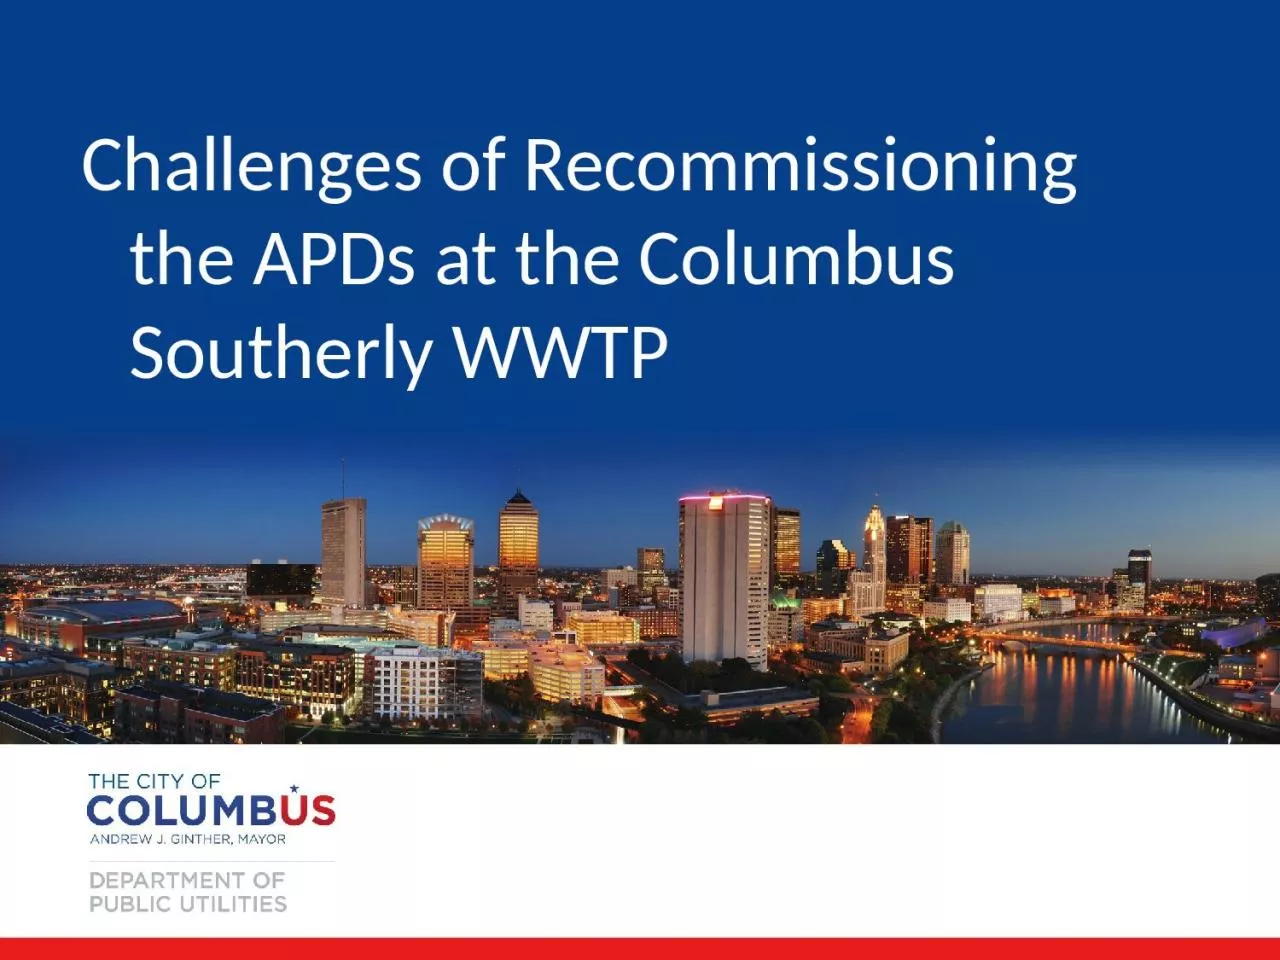 Challenges of Recommissioning the